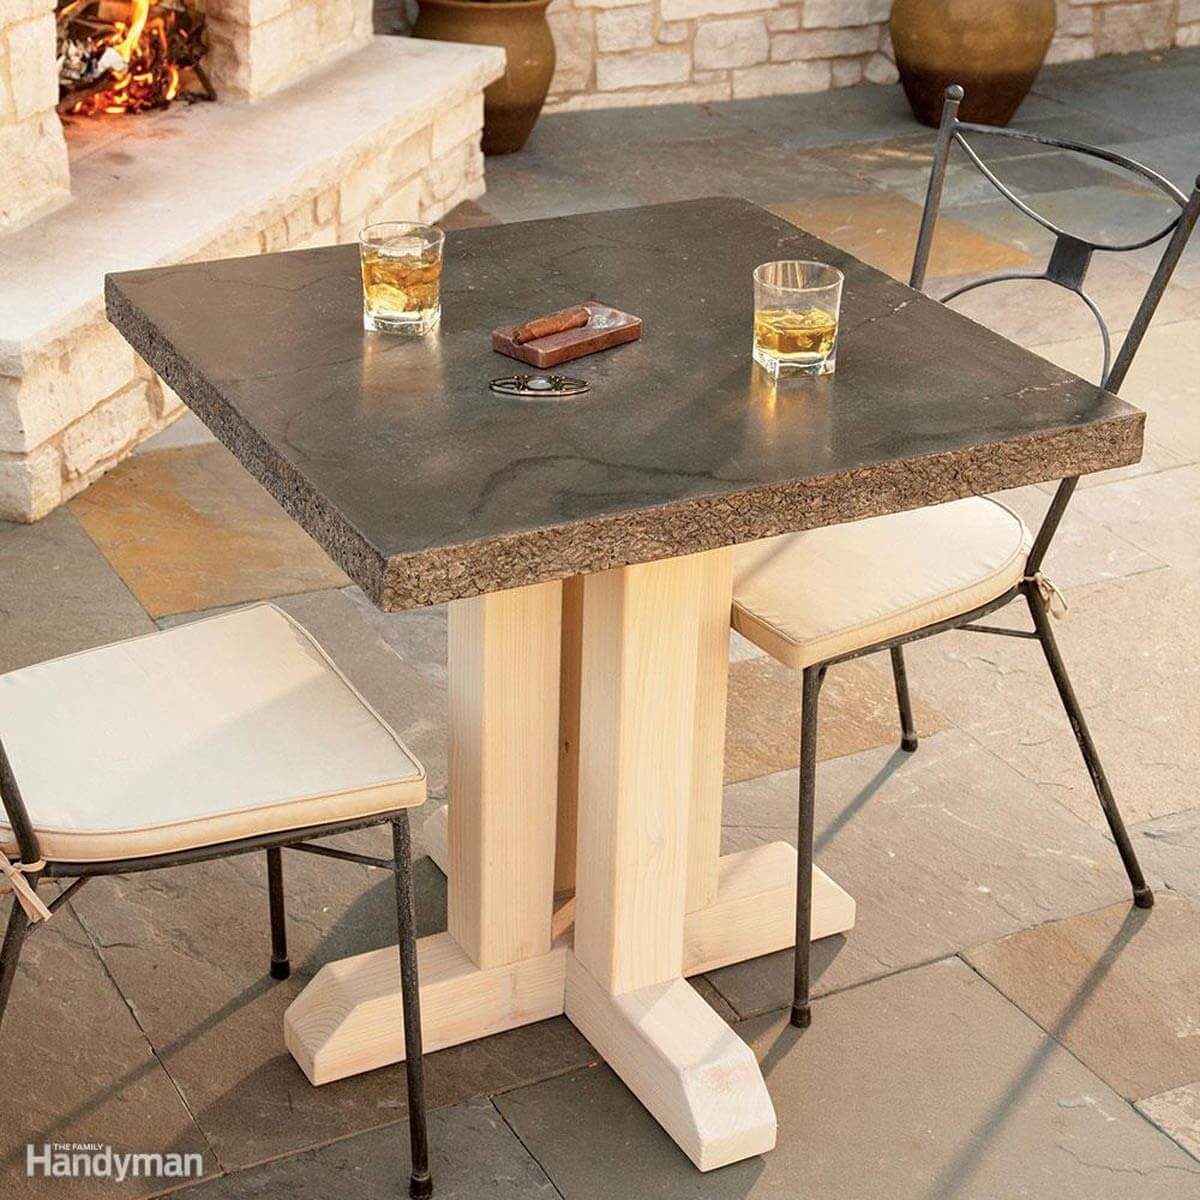 15 Awesome Plans For Diy Patio Furniture The Family Handyman